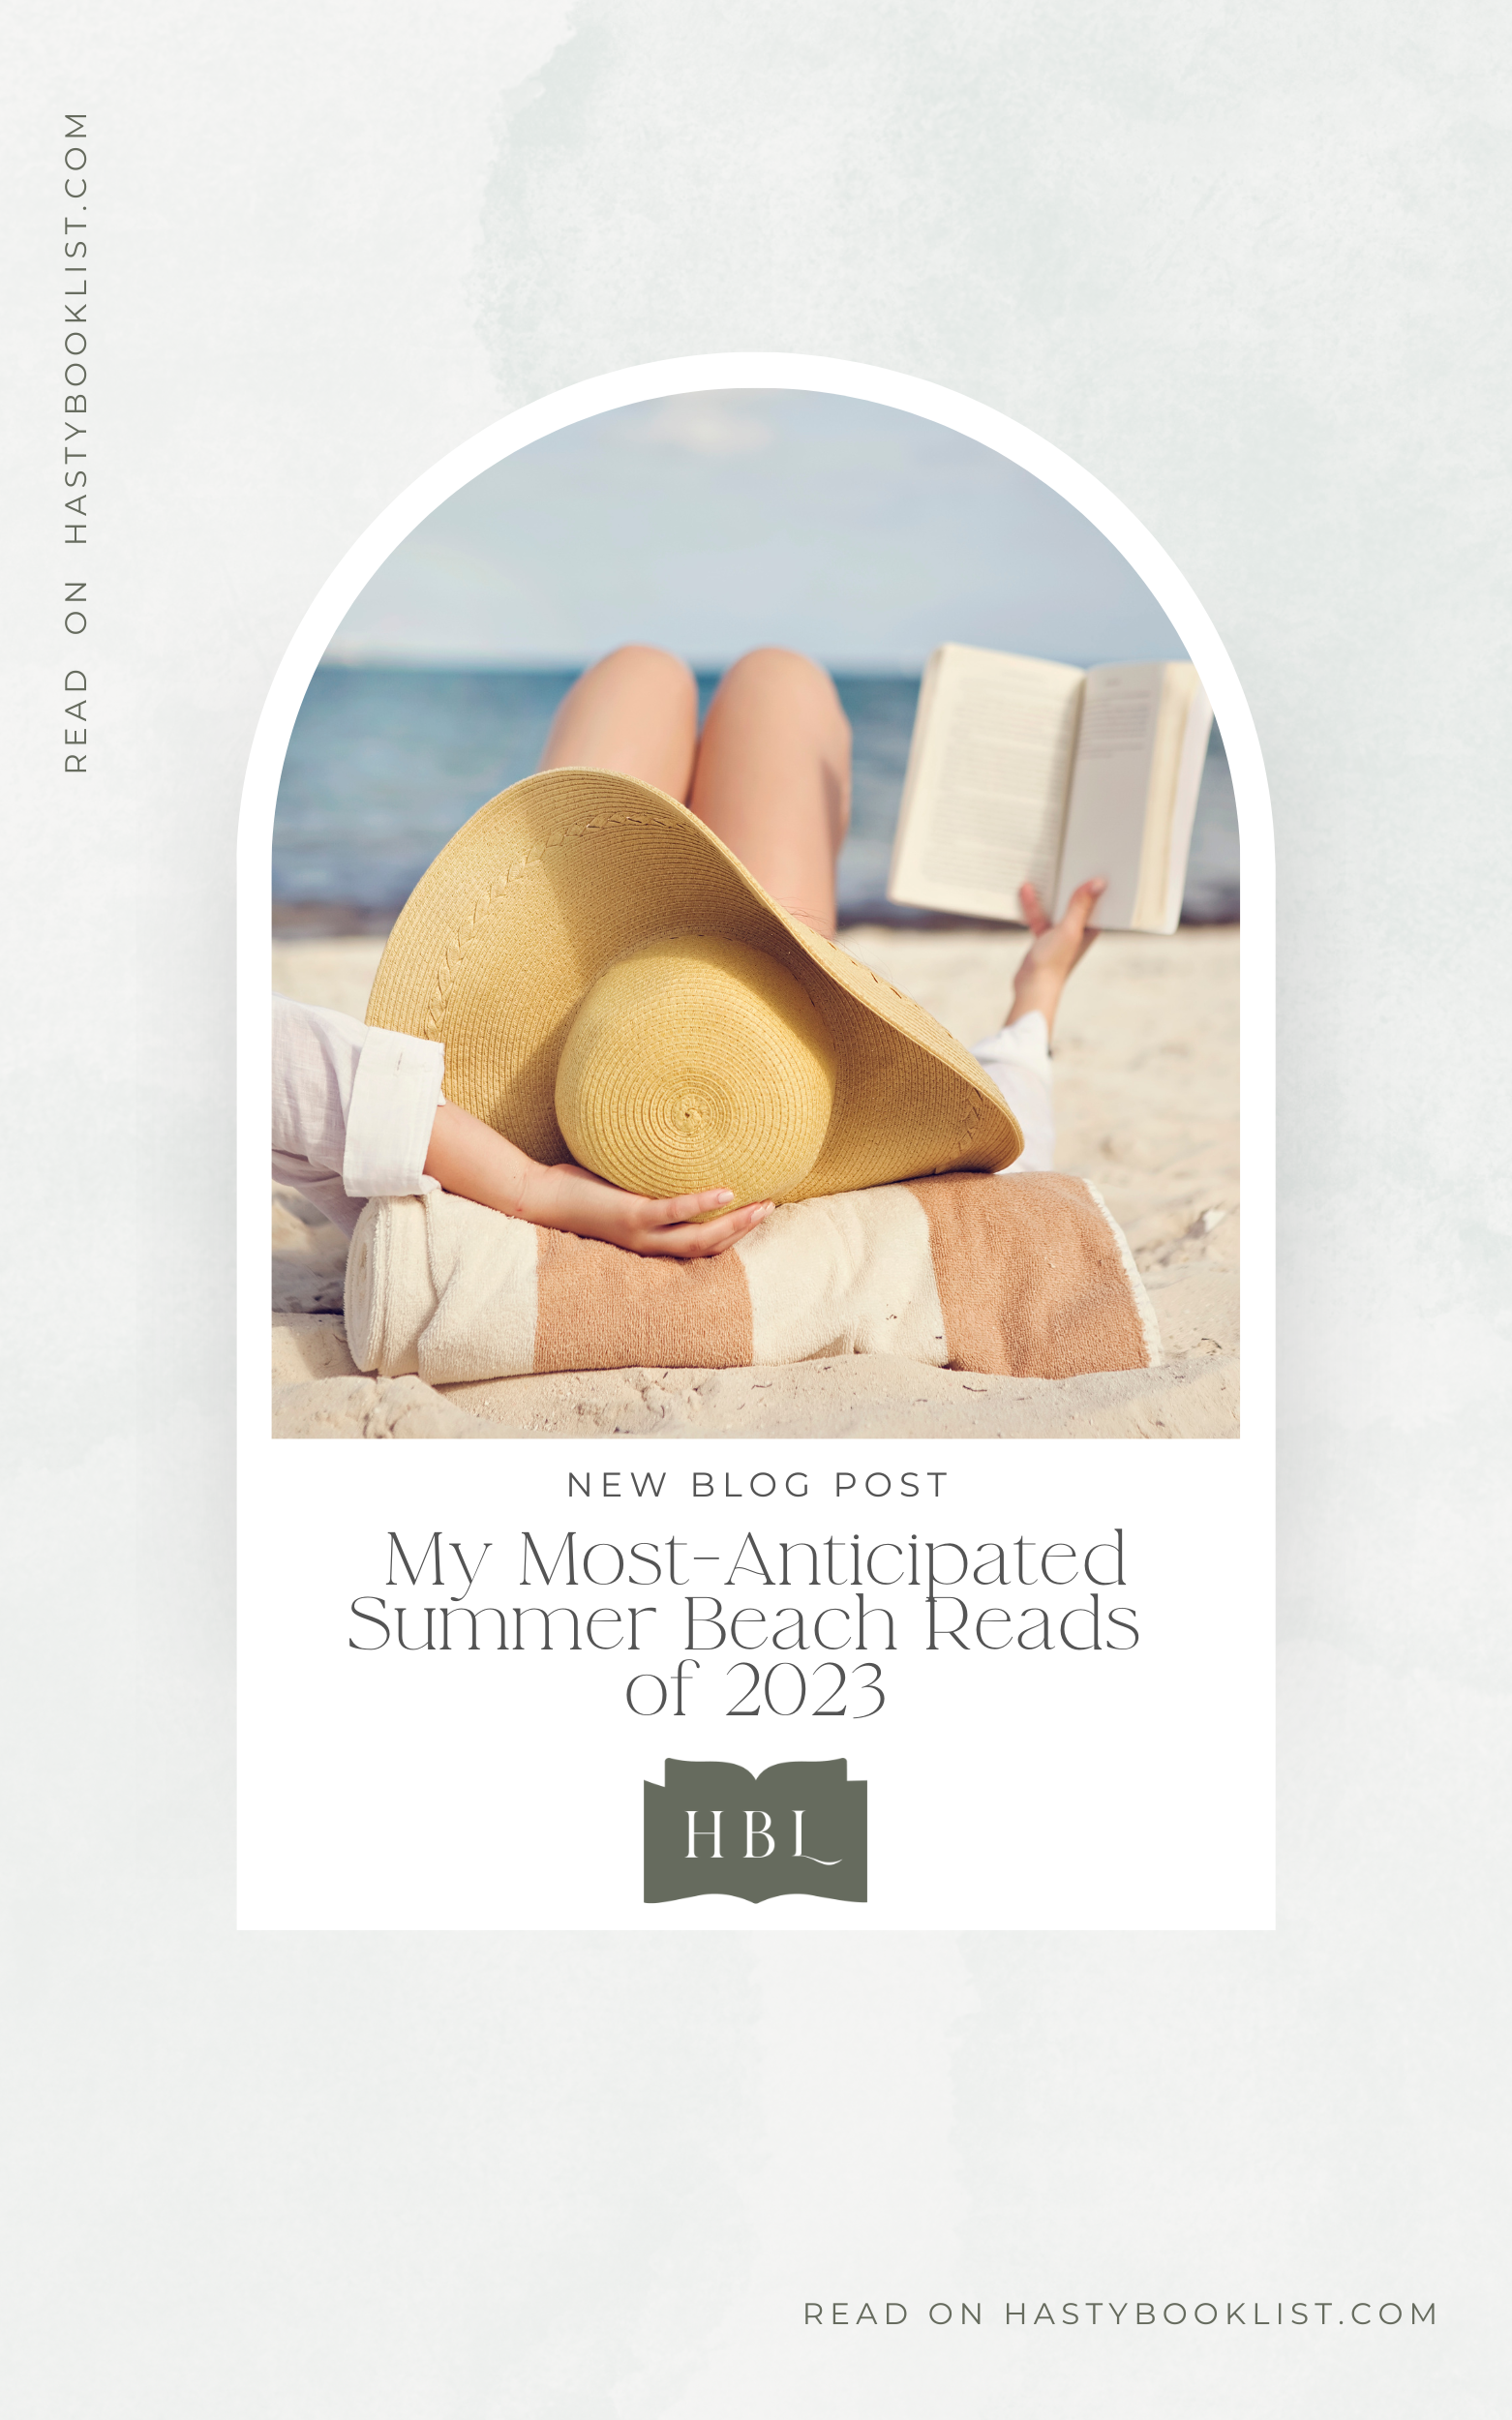 My Most-Anticipated Summer Beach Reads of 2023 - Book Review